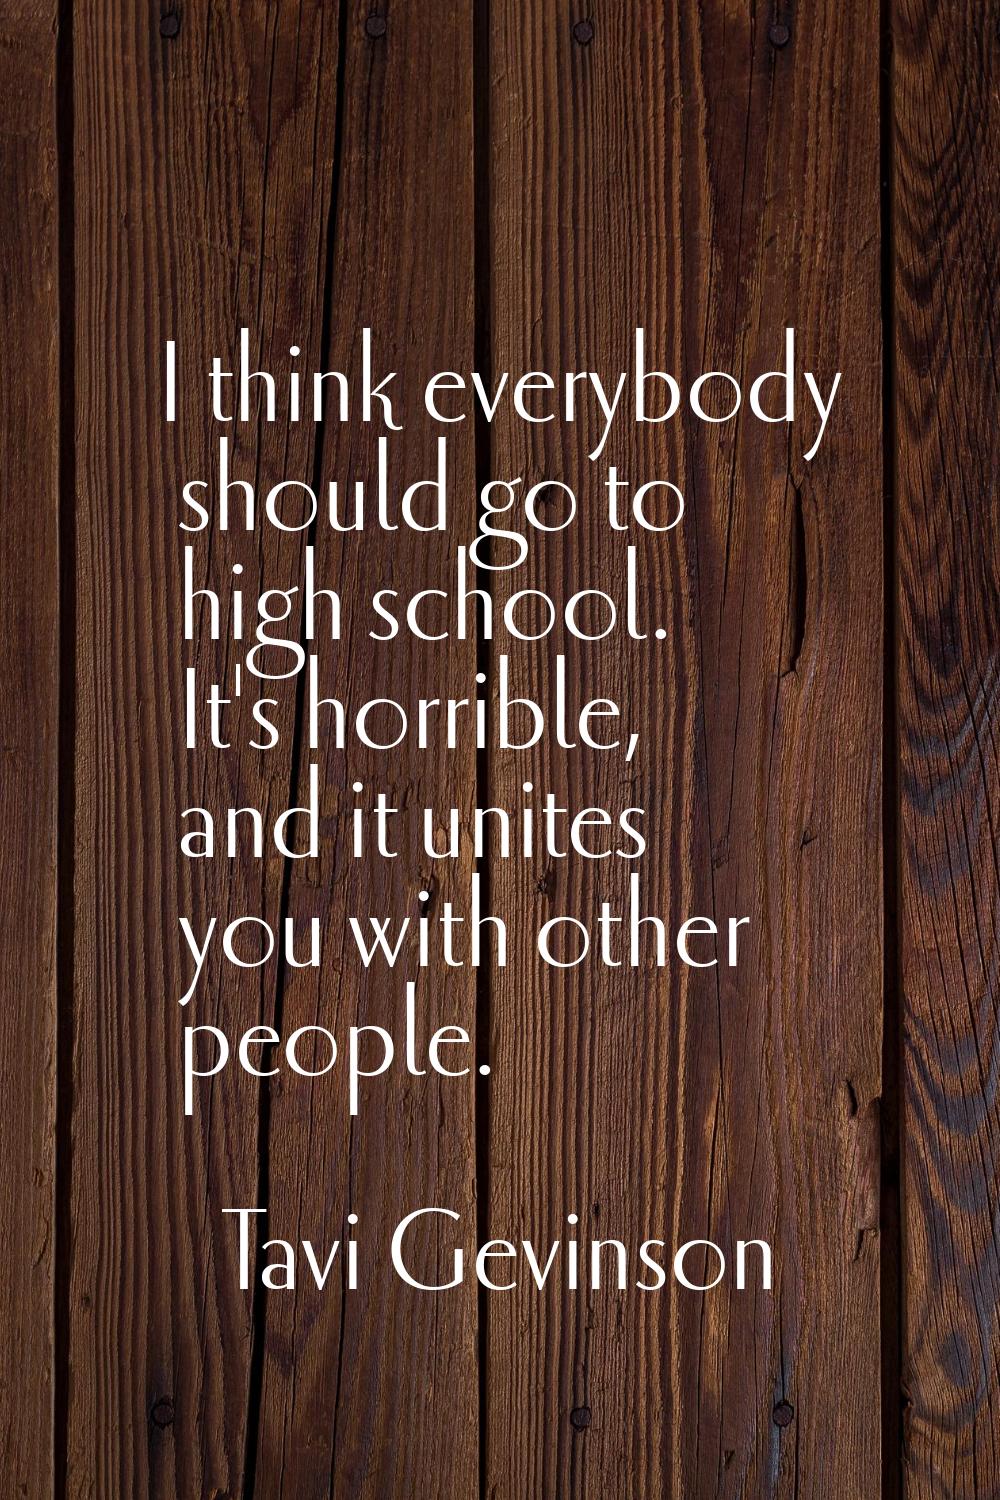 I think everybody should go to high school. It's horrible, and it unites you with other people.